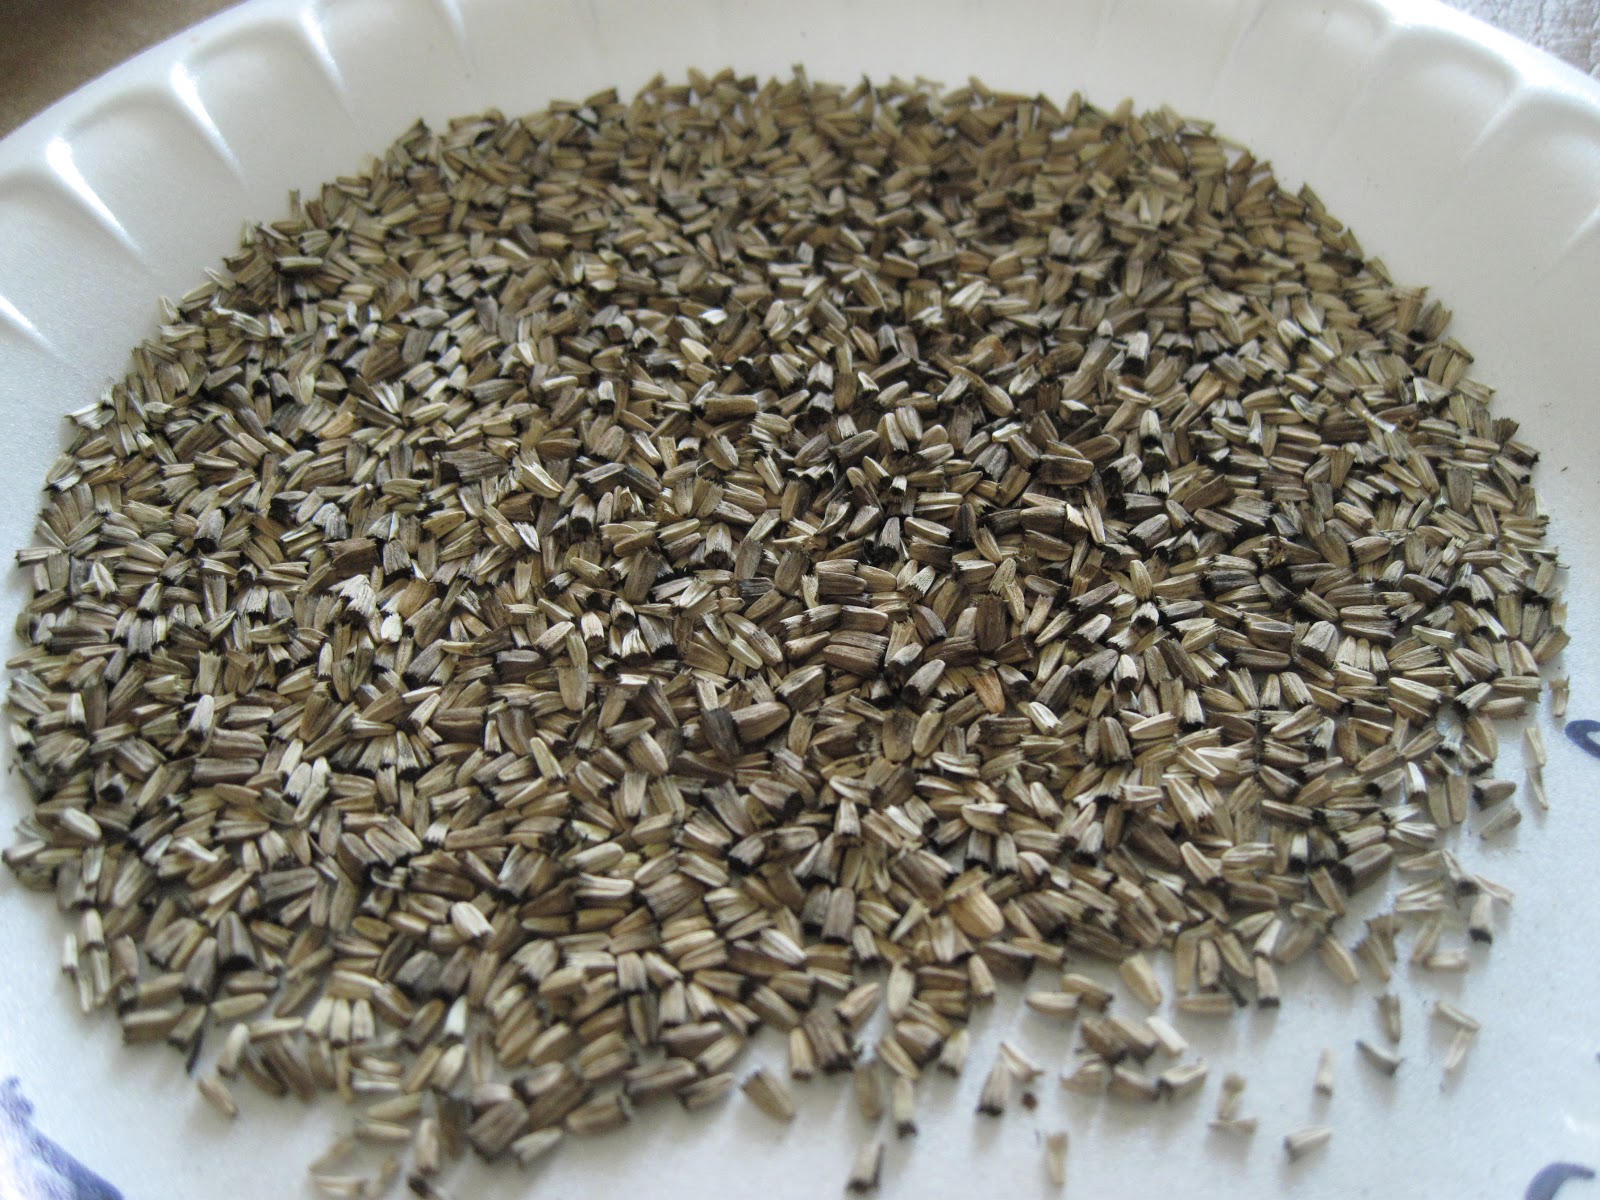 Echinacea seeds all cleaned up -- tedious work